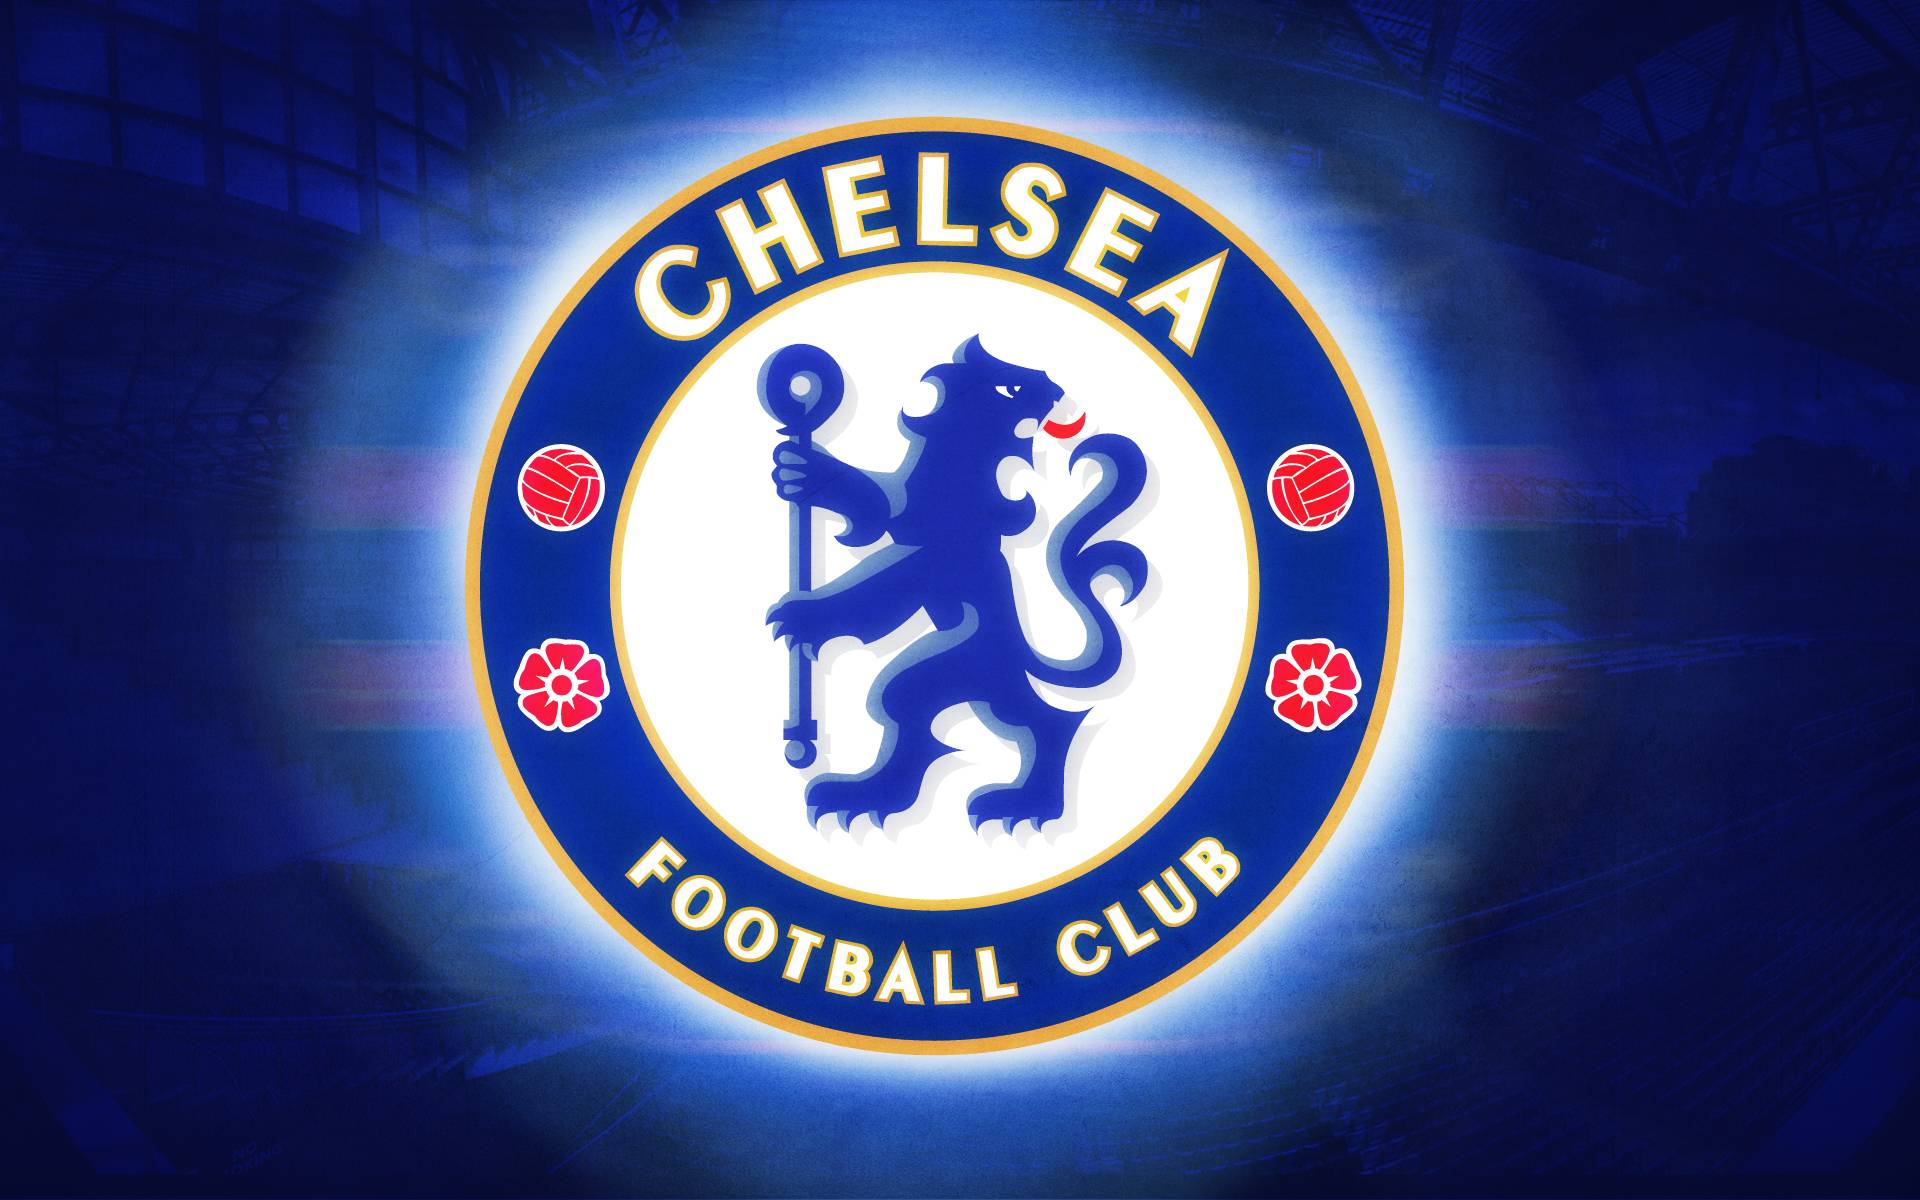 Chelsea Football Club Logo Wallpapers Download Wallpapers